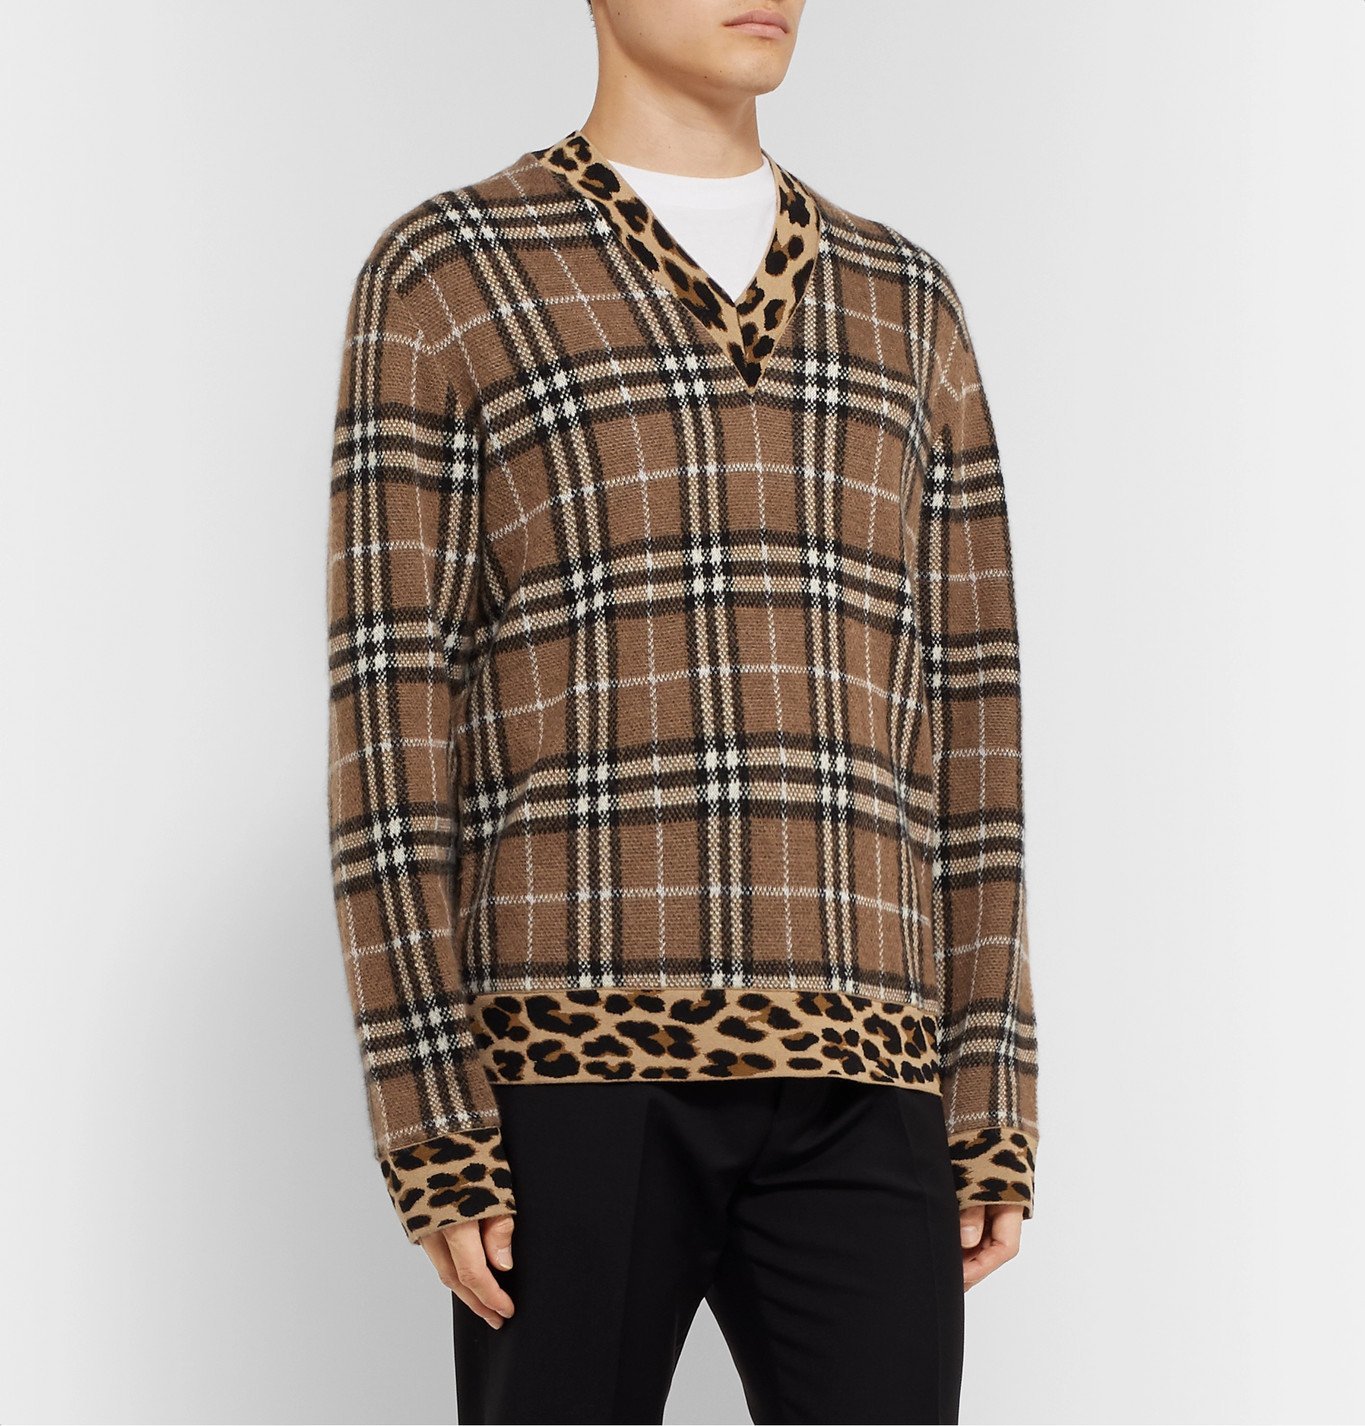 Burberry - Leopard-Trimmed Checked Jacquard-Knit Sweater - Brown Burberry